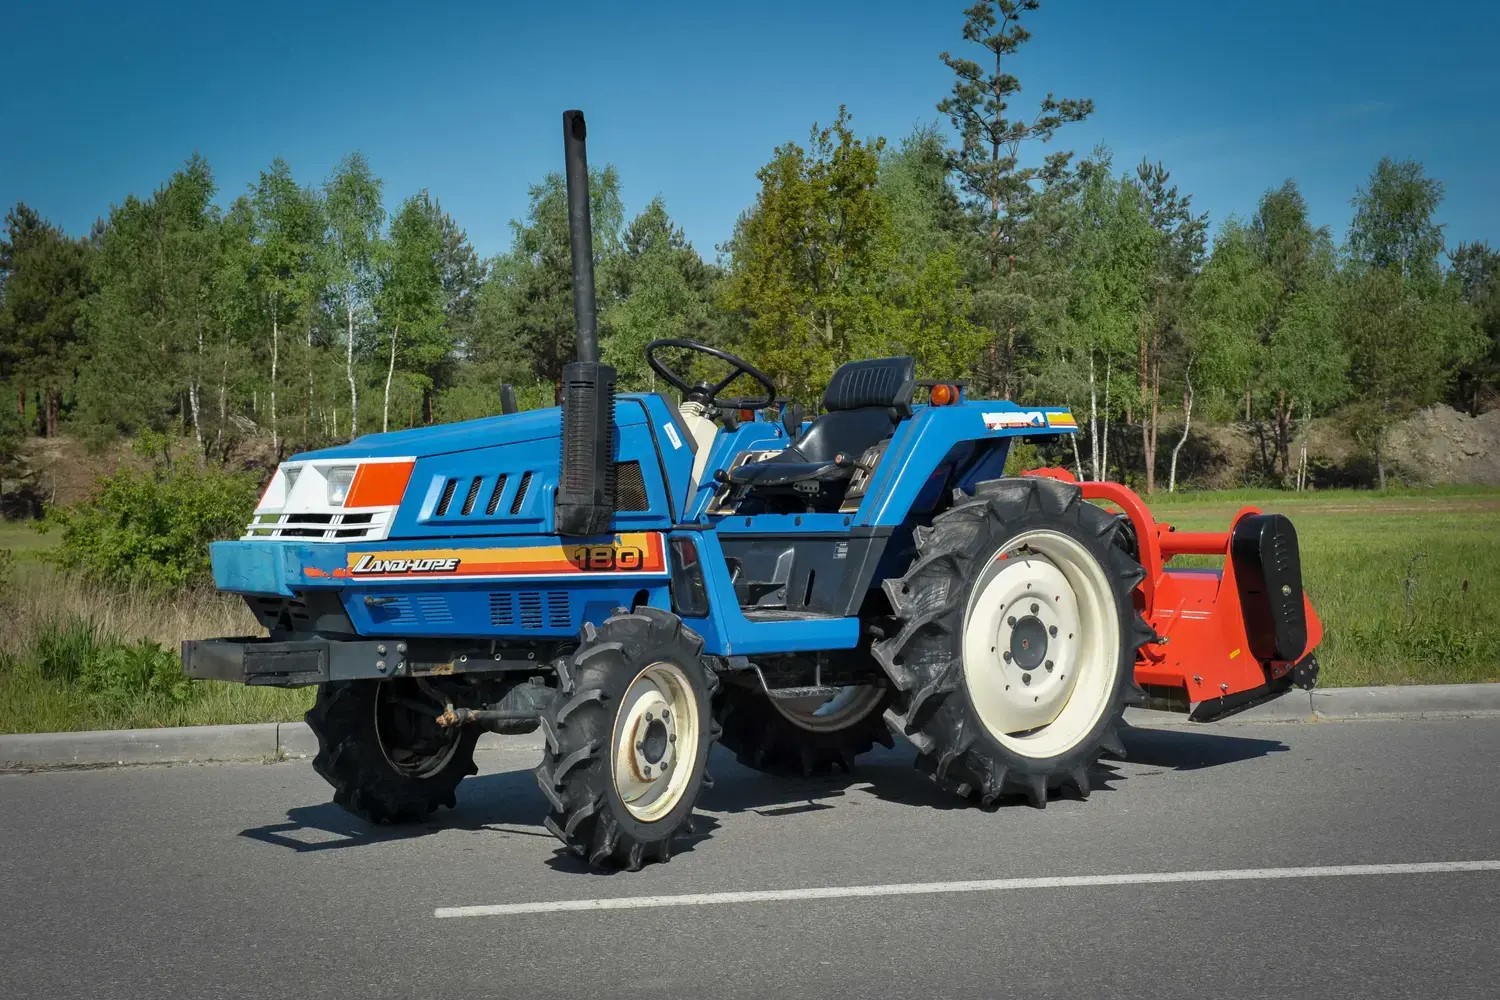 Iseki TU180 with 18 HP 4x4 drive and a heavy flail mower with a working width of 105 cm.